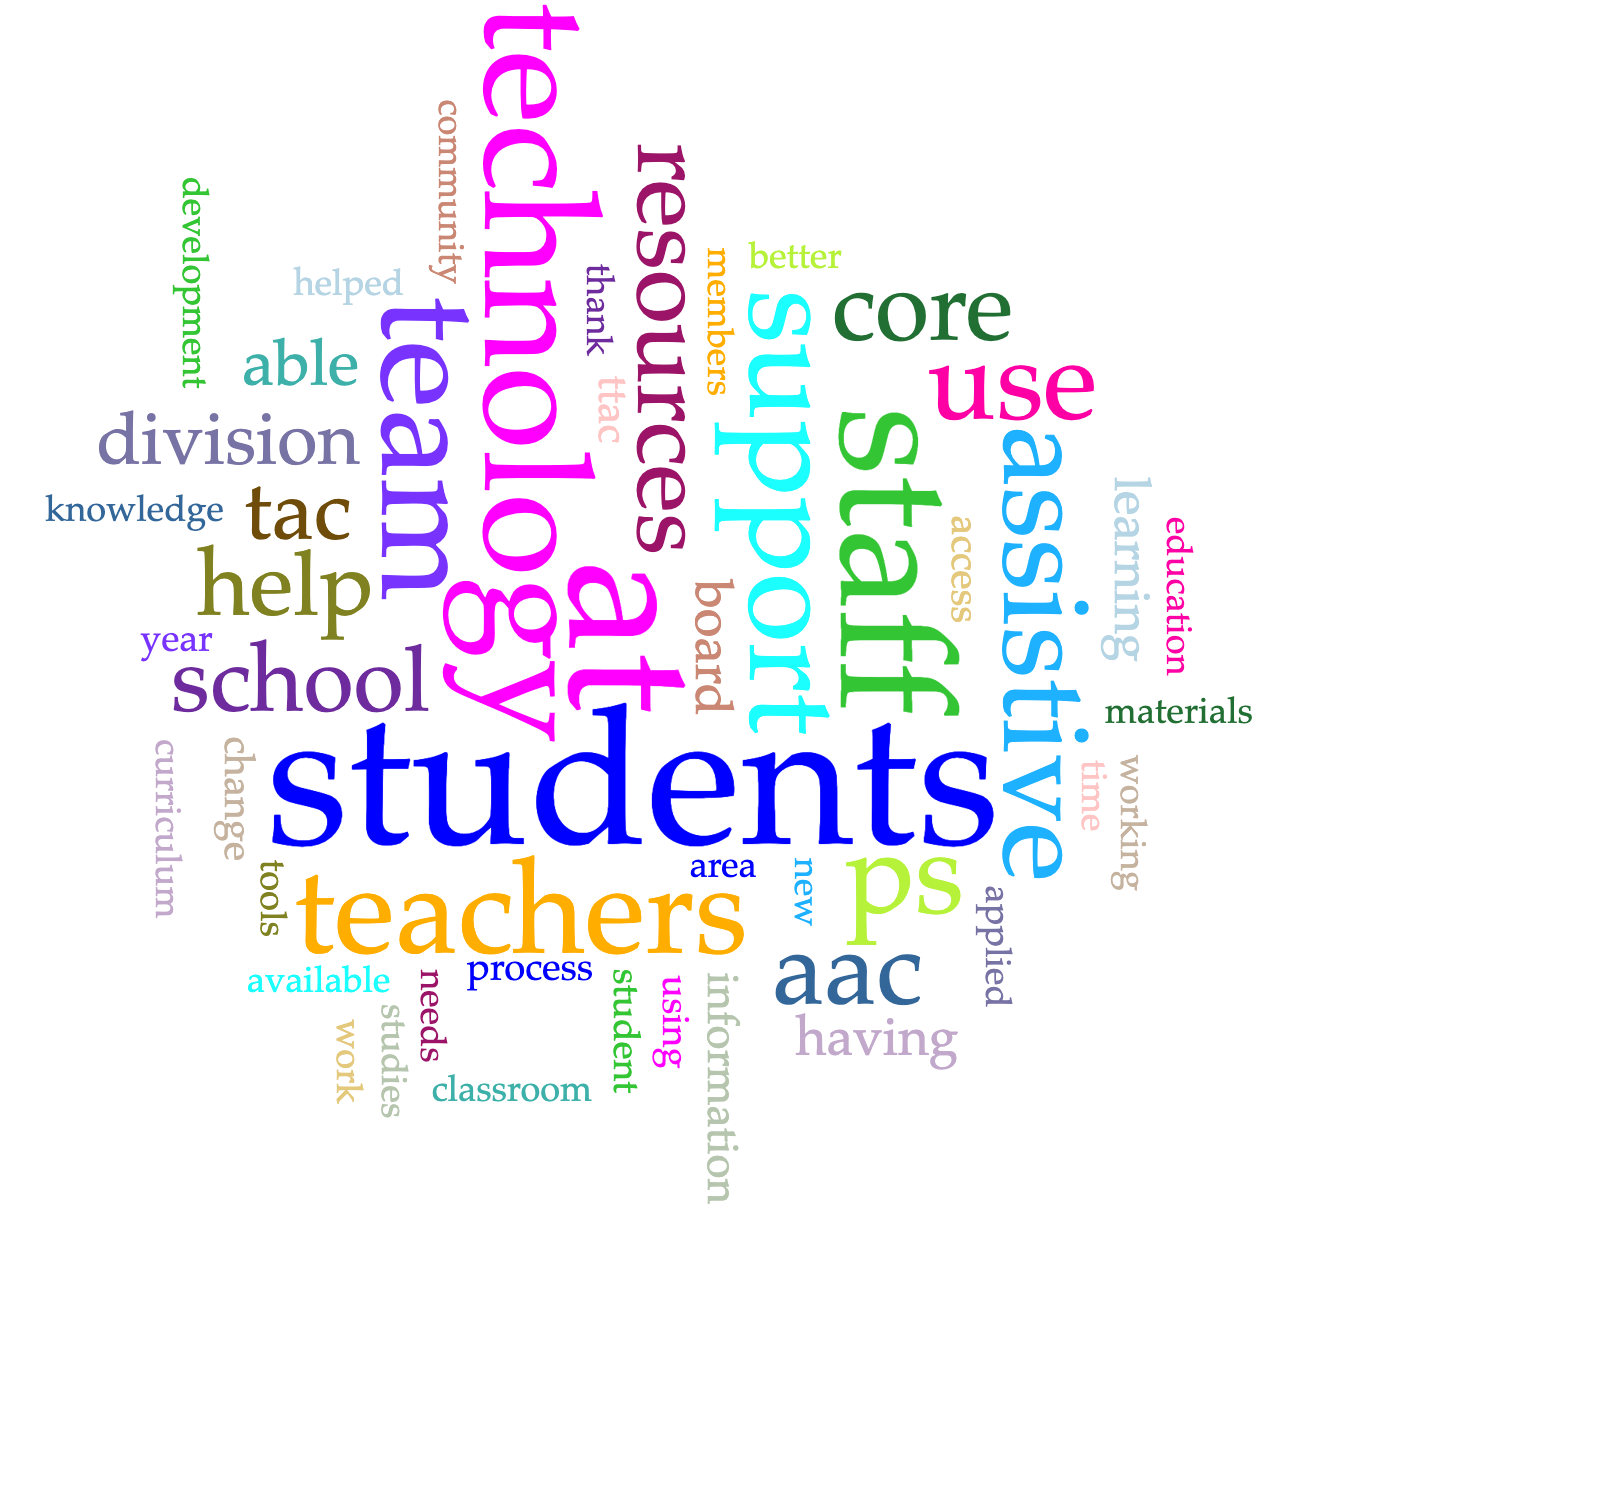 A word cloud containing words that are used often to describe Assistive Technology, such as resources, support, students and AAC